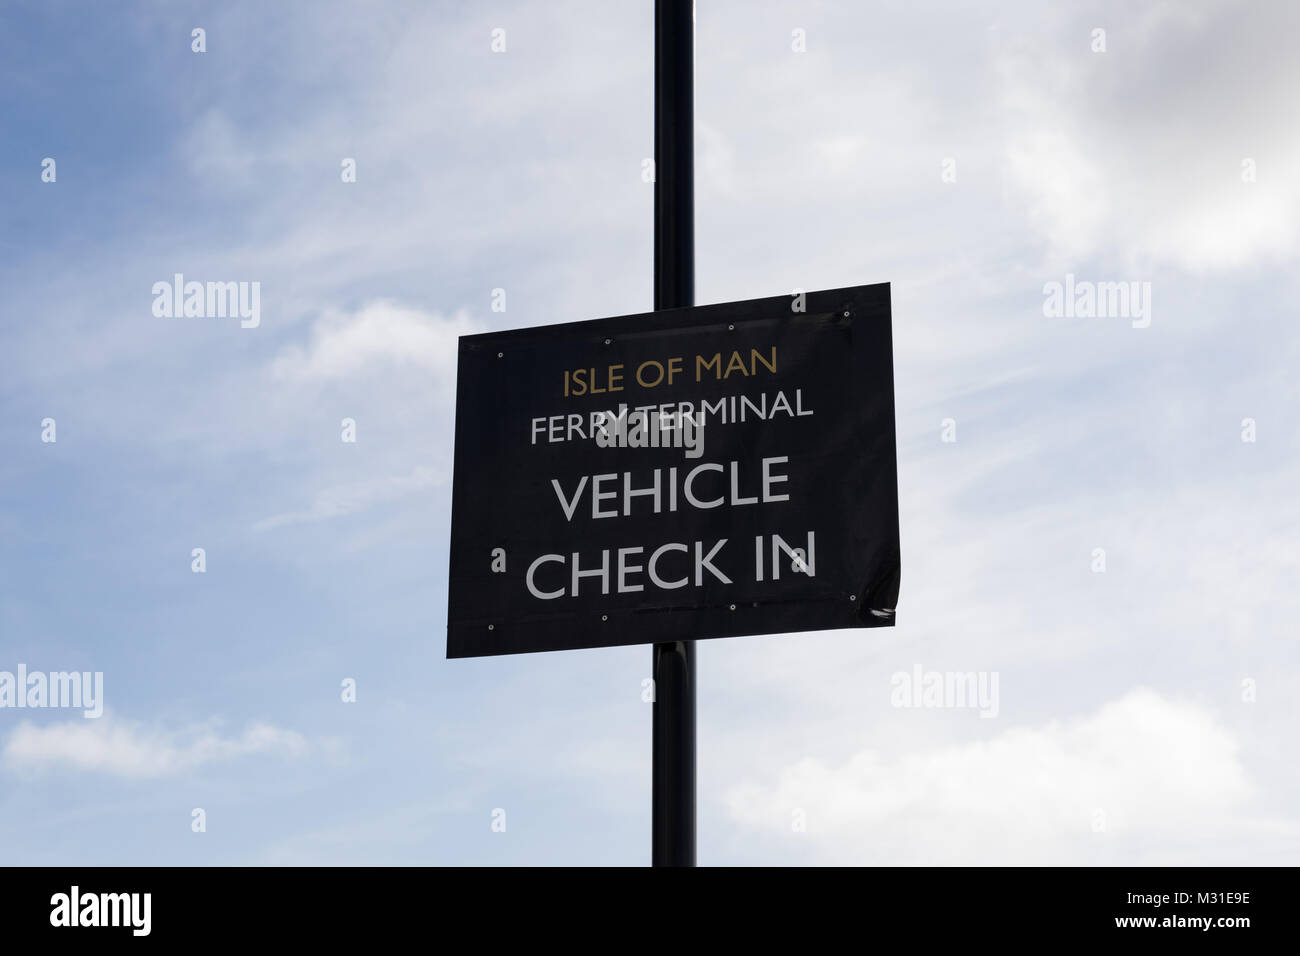 Isle fo Man Ferry Terminal, vehicle check in sign, Liverpool, UK Stock Photo